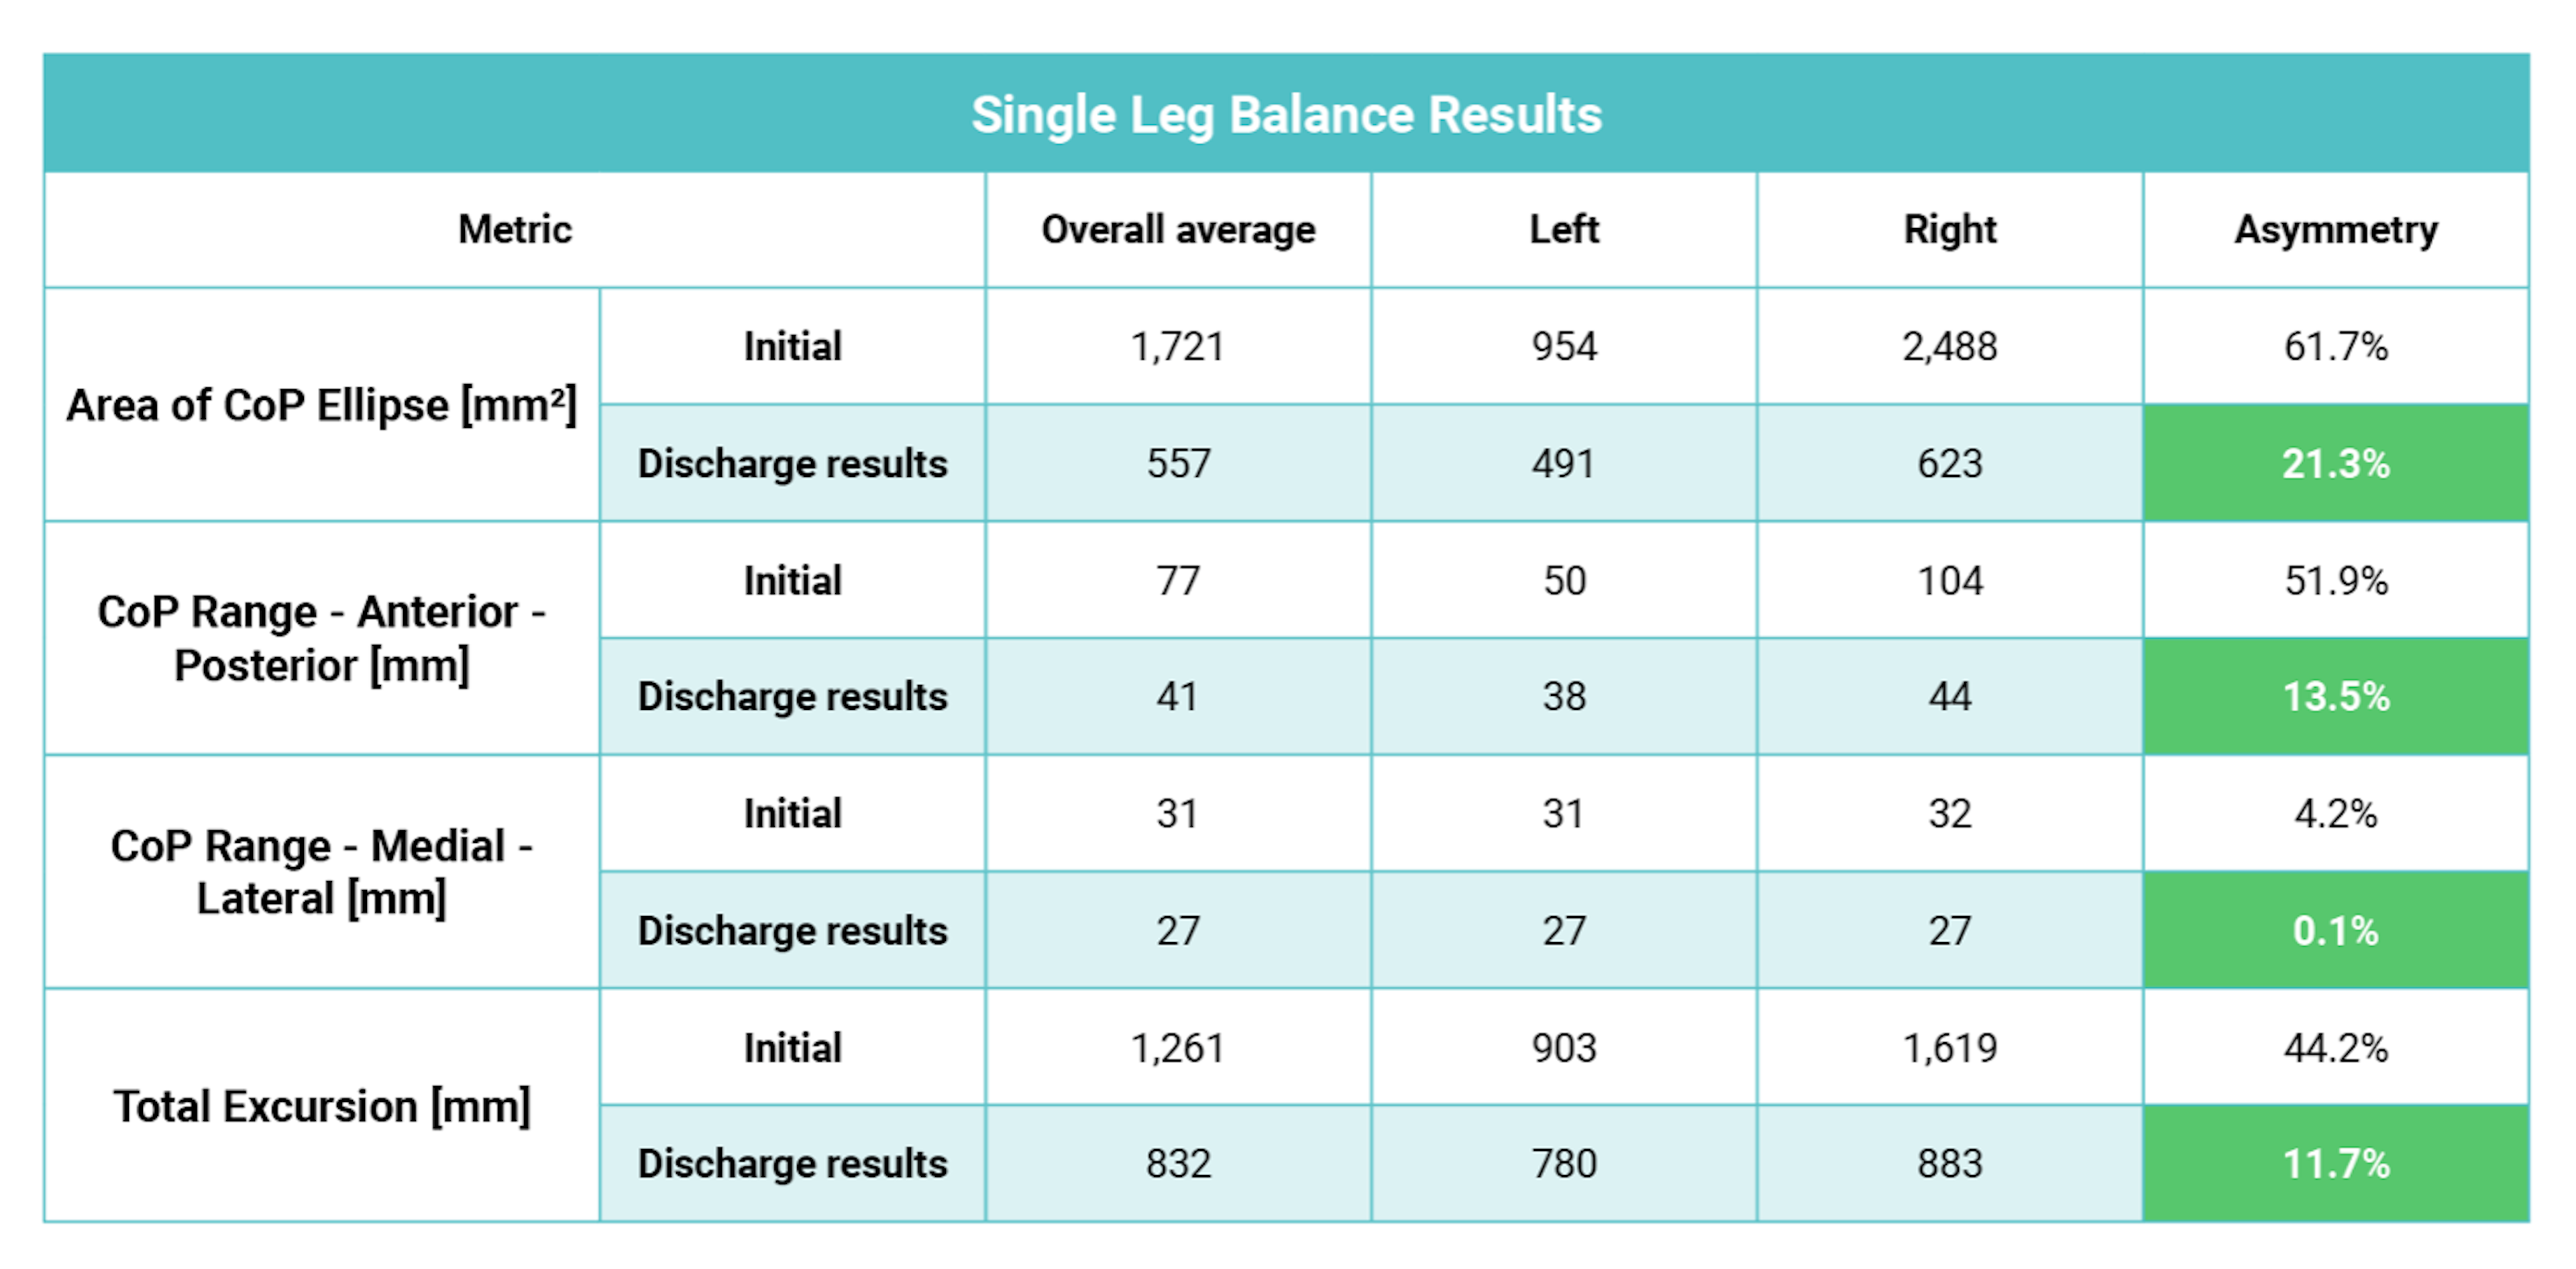 Single leg balance assessment results from ForceDecks between initial test and discharge testing demonstrating the improvements made over time.